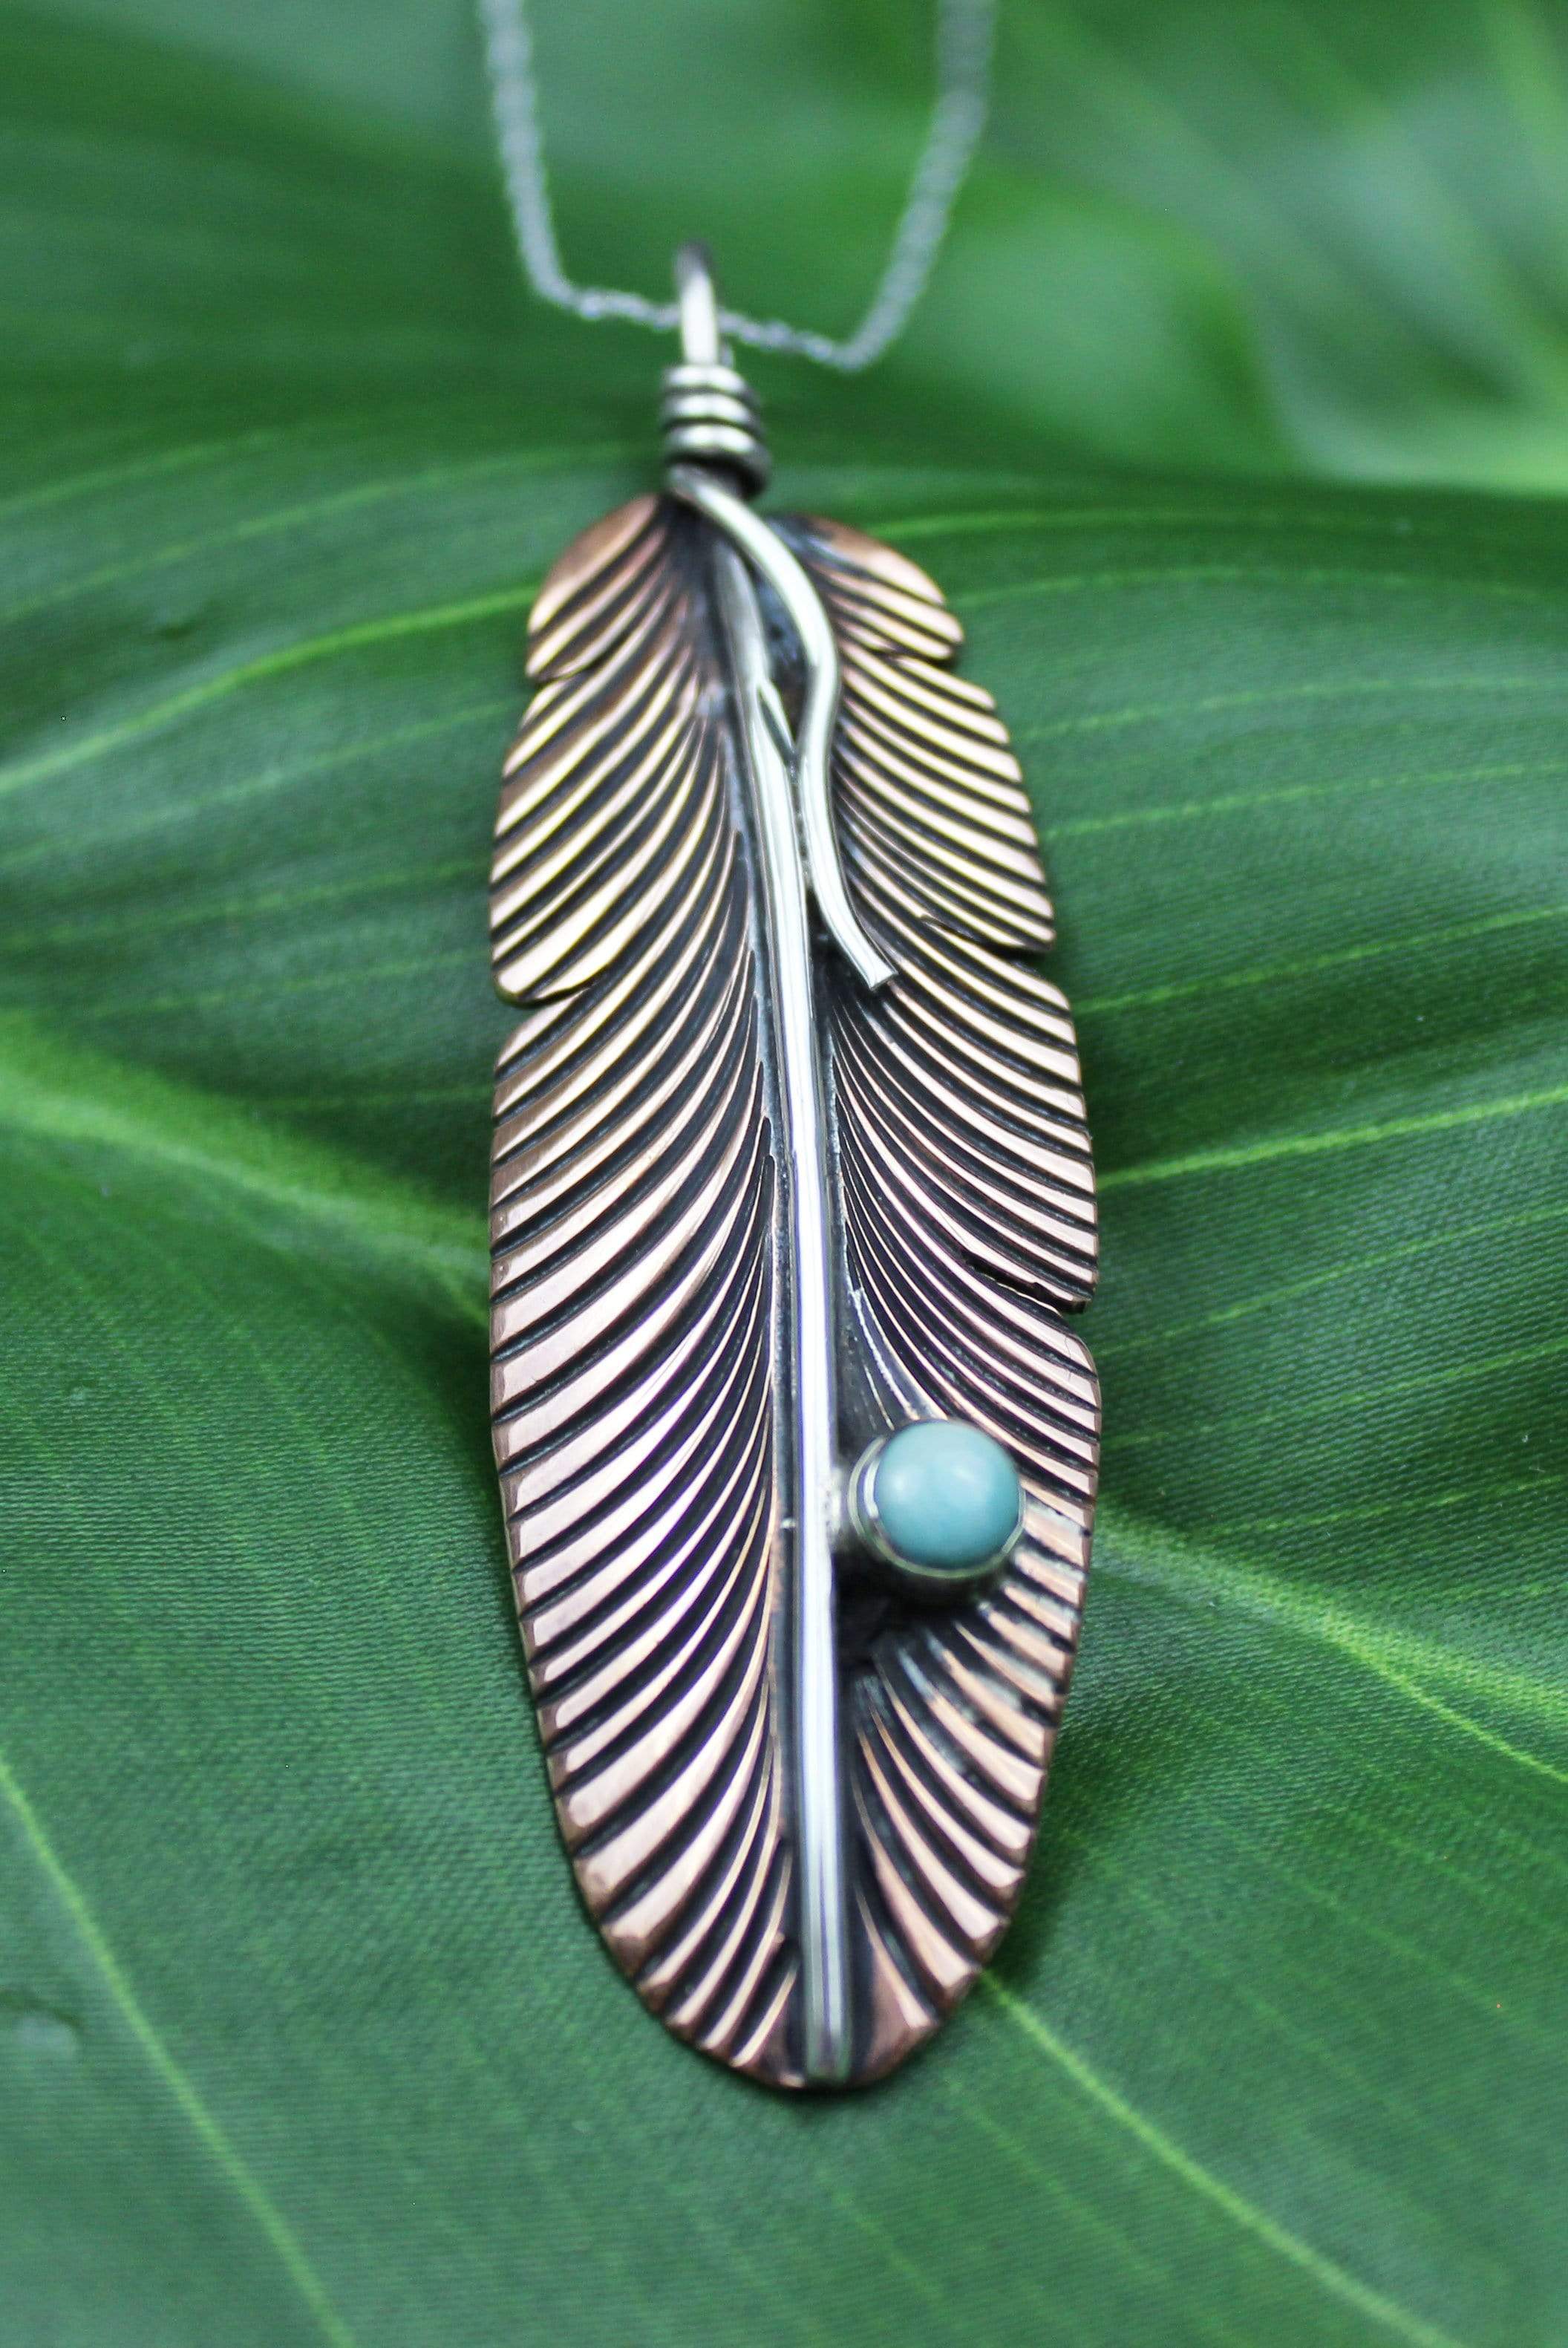 Pendants Copper Pendant - HPSilver, Copper and Sterling Silver with Turquoise Liberty Feather Pendant PN.VIC.4001